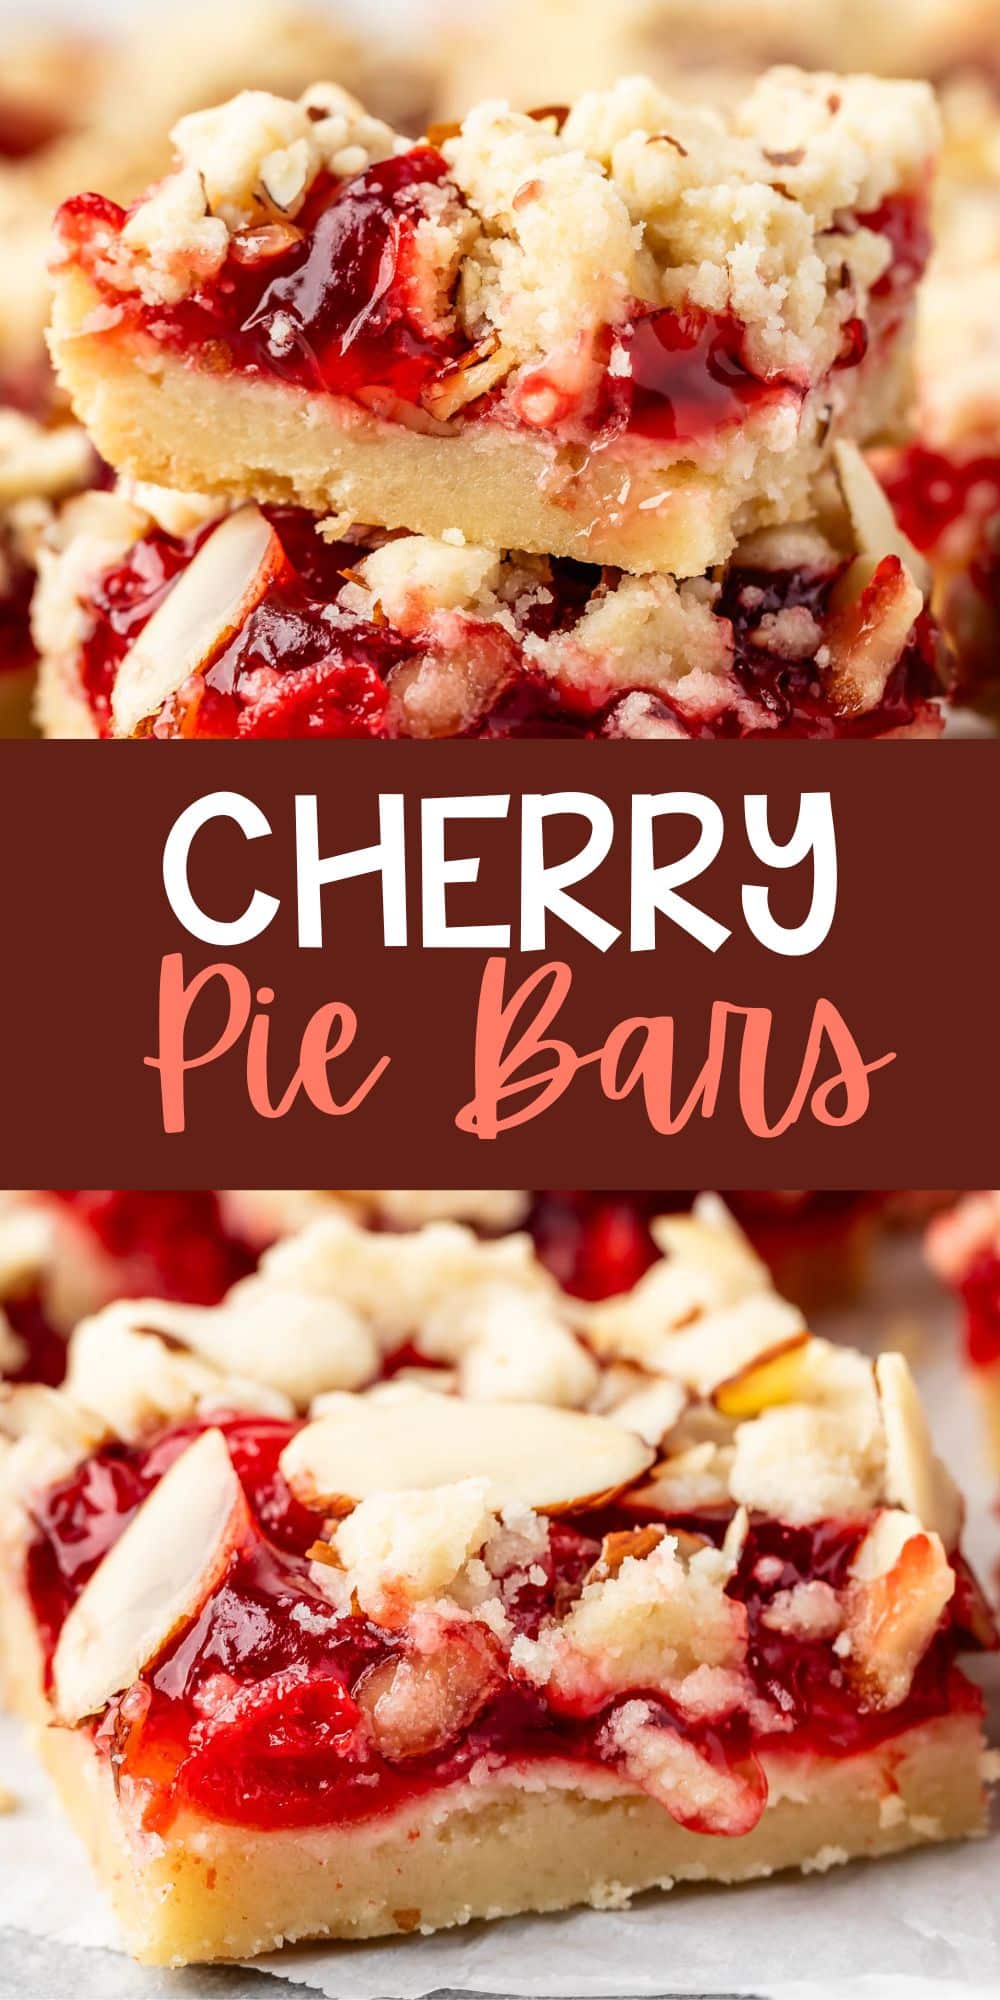 two photos of pie crust bars with red cherry pie filling and sliced almonds on top with words on the image.